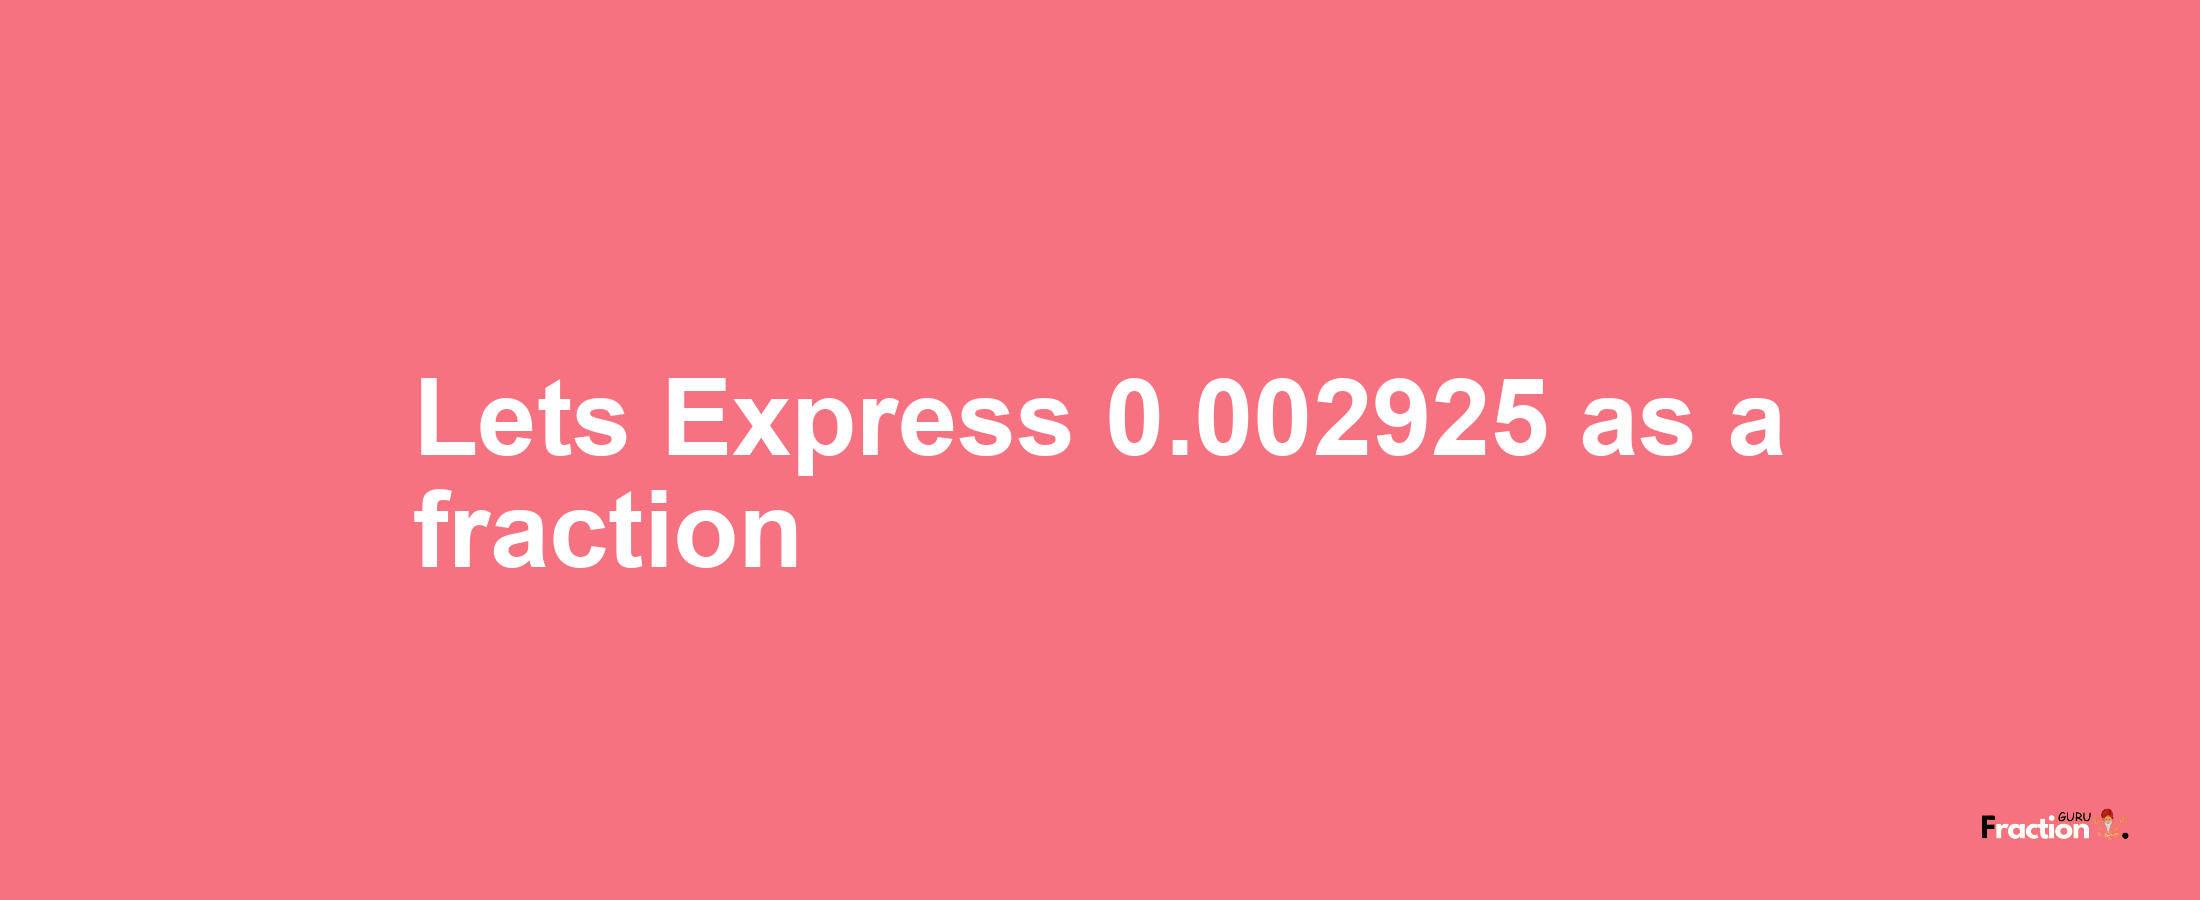 Lets Express 0.002925 as afraction